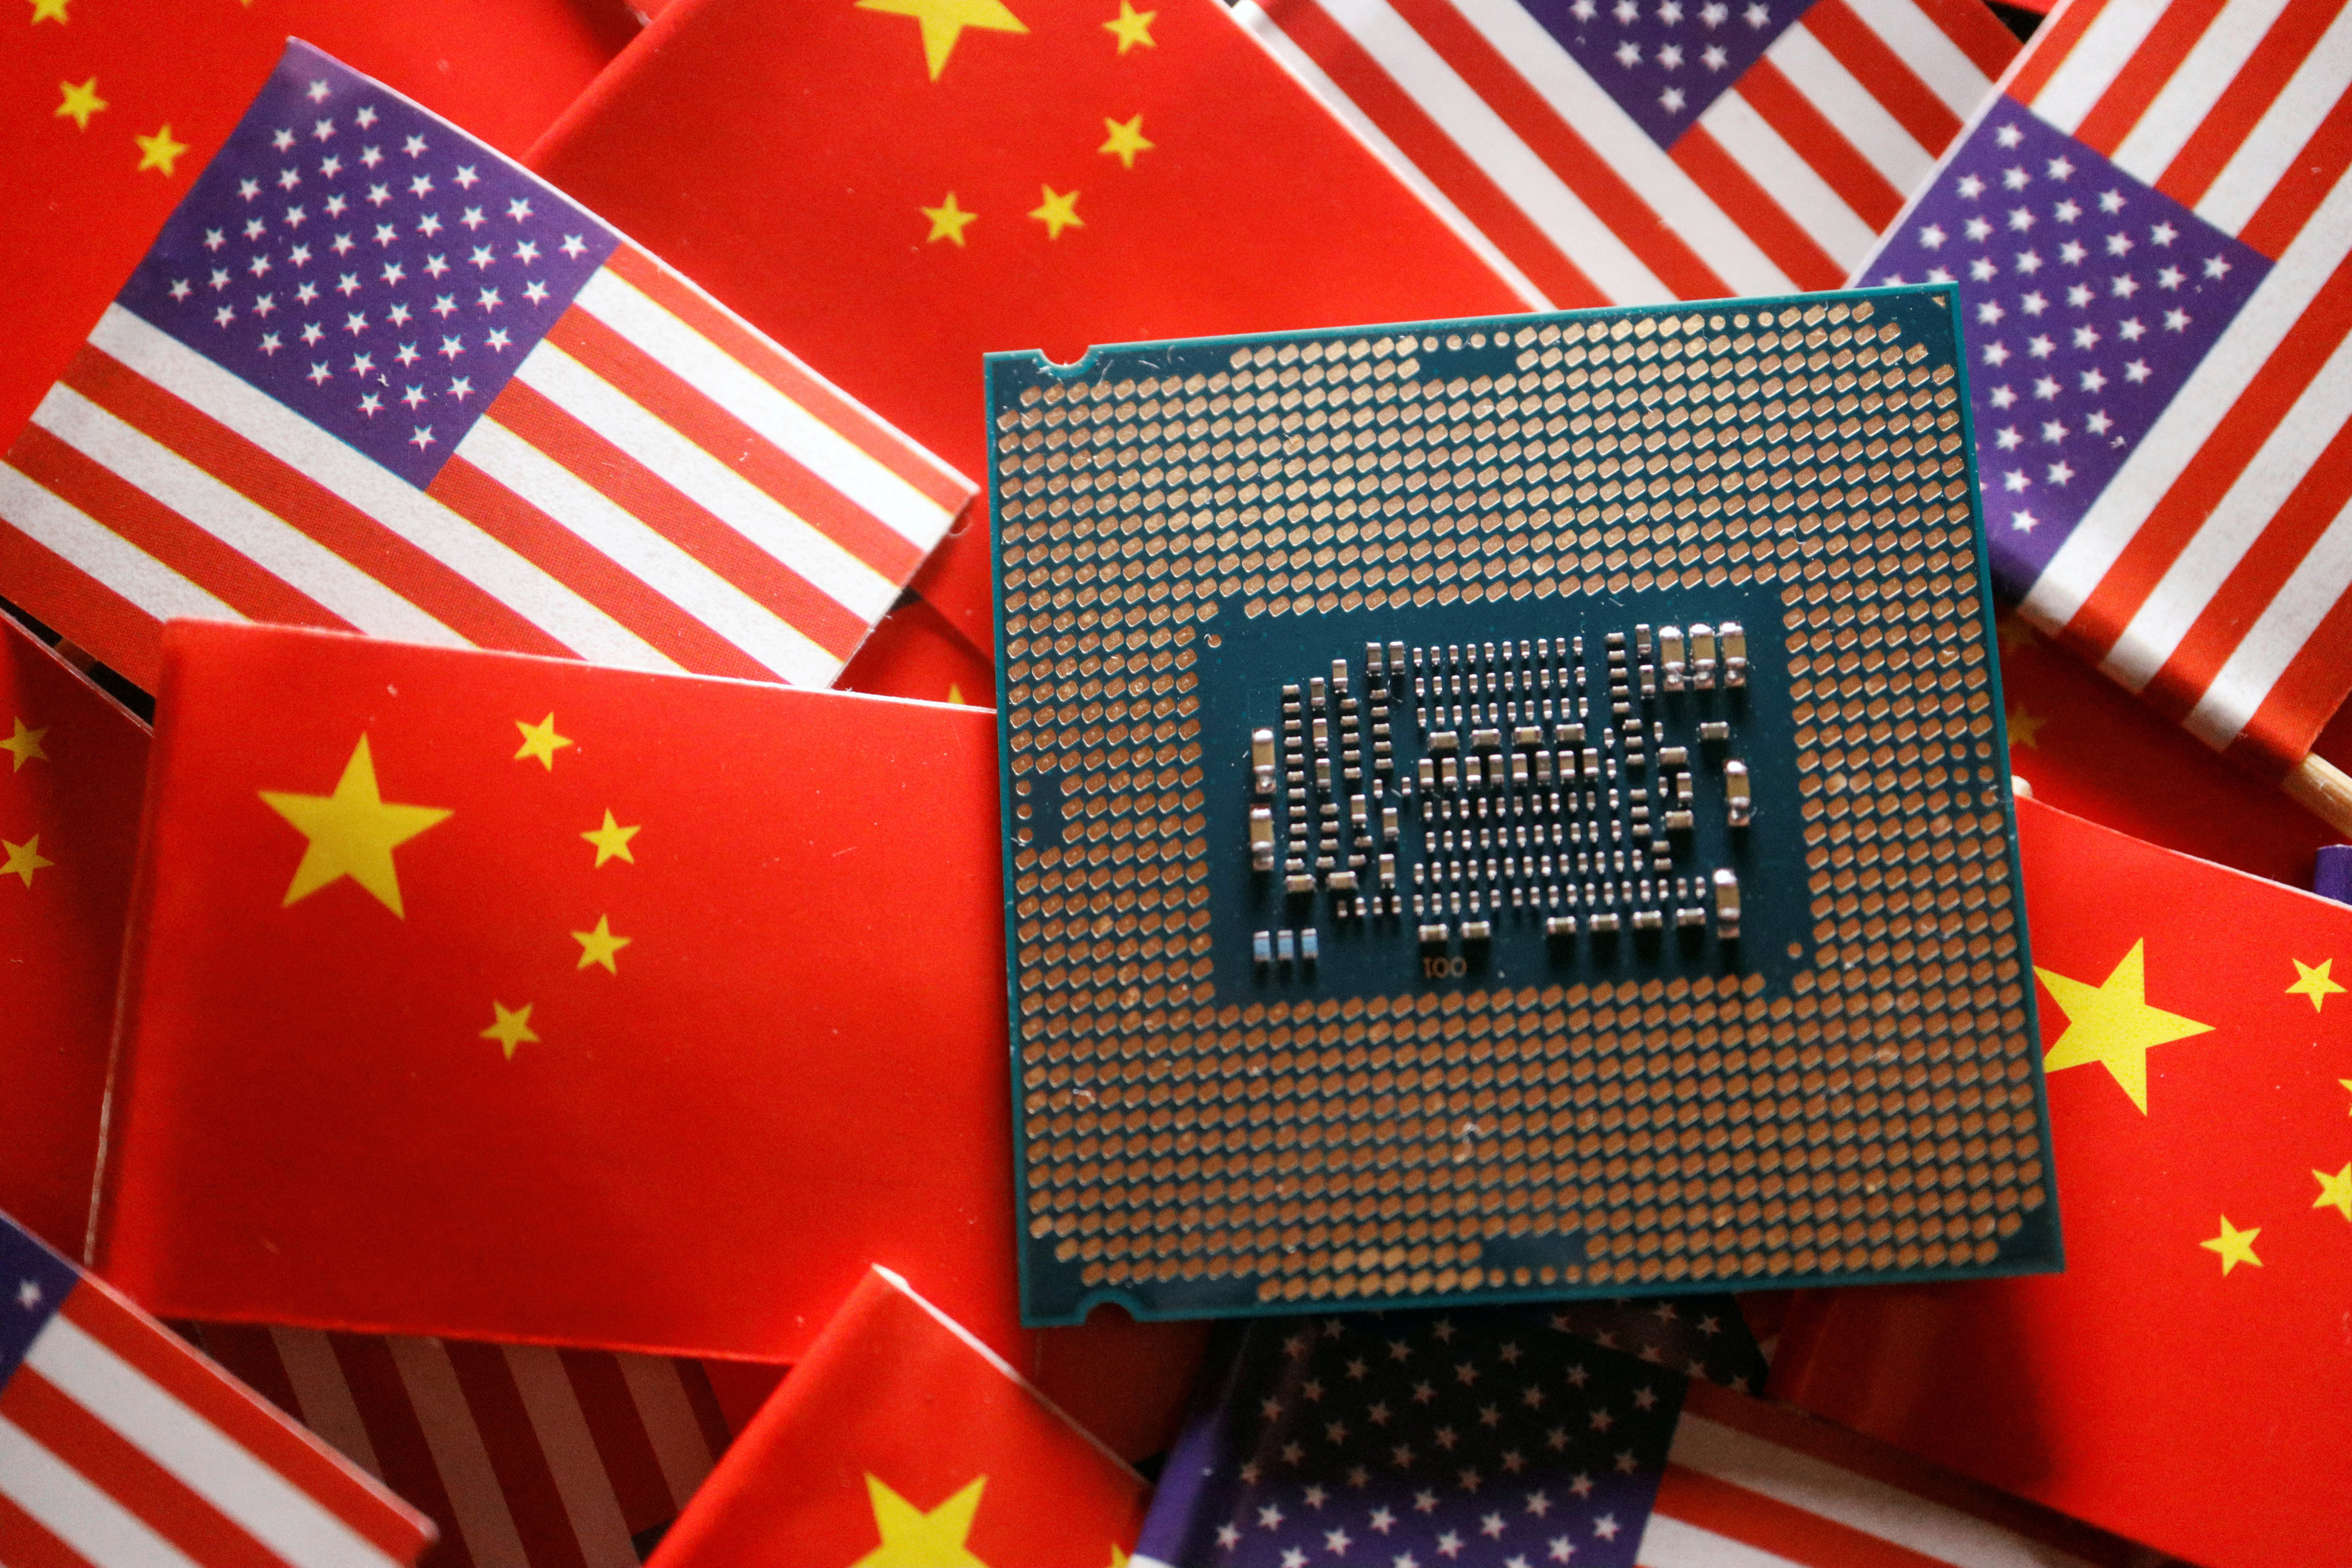 China is the world’s largest producer of gallium and germanium, metals used in semiconductors. Photo illustration: Reuters